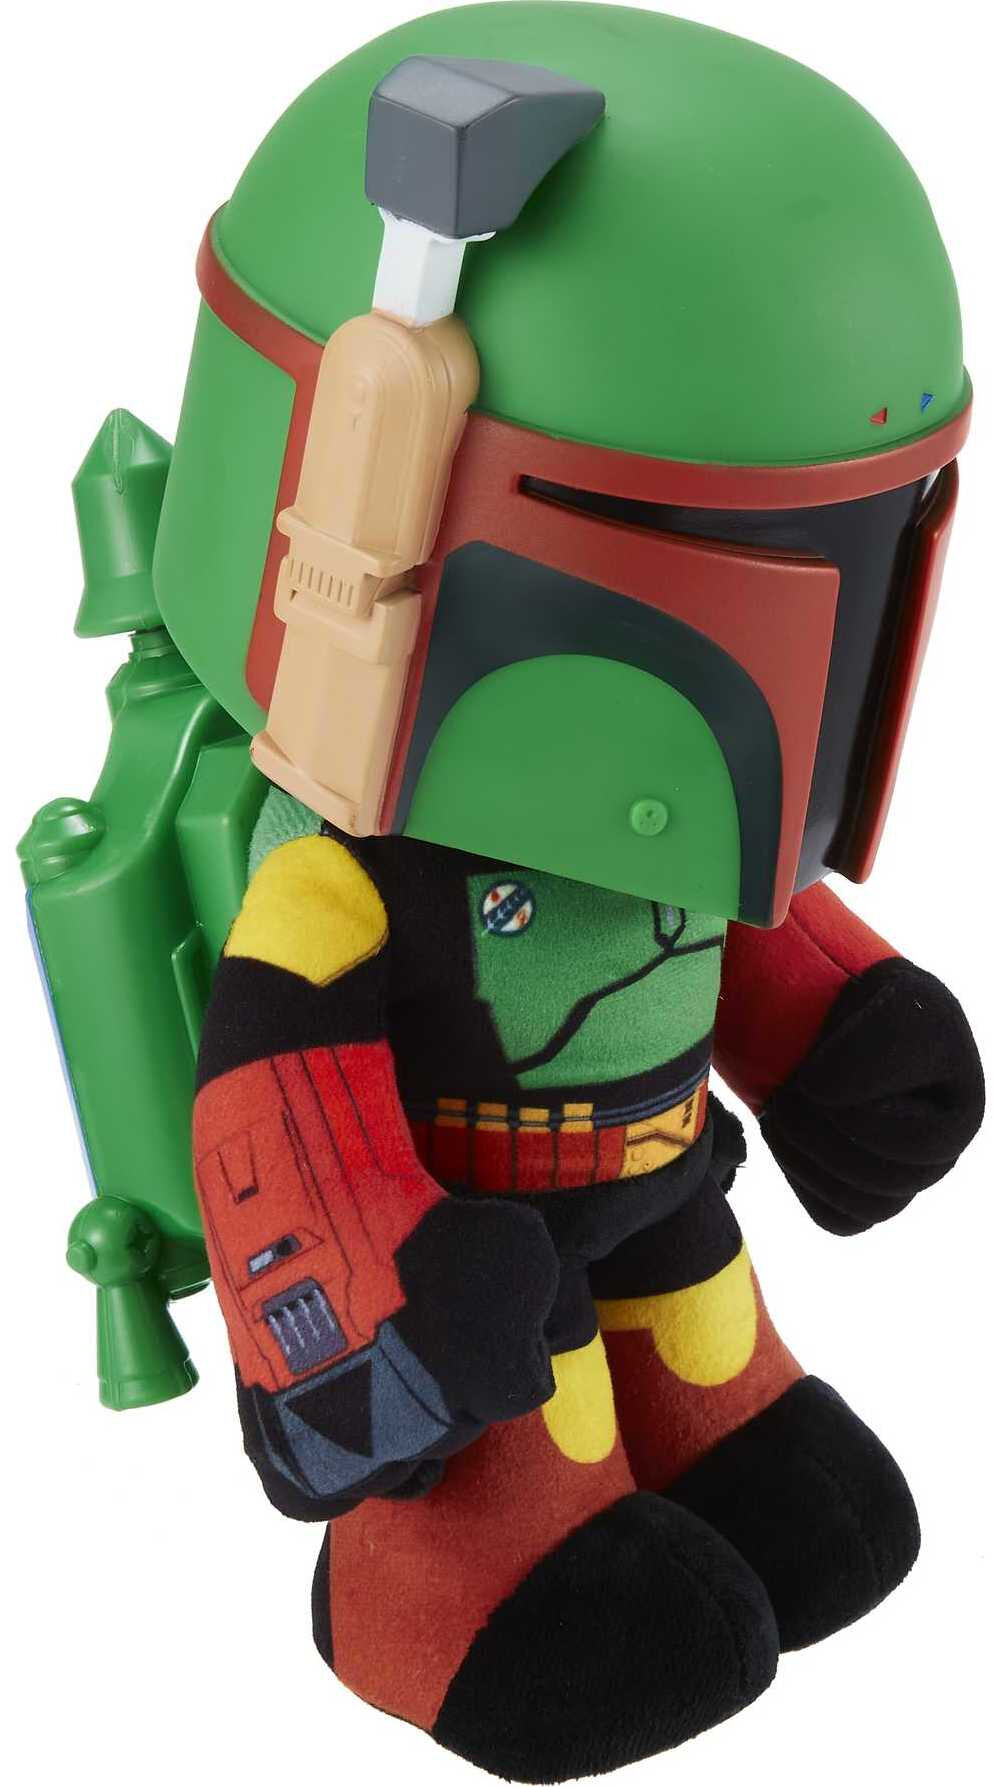 Star Wars Boba Fett Voice Cloner 12" Feature Plush with Air-Powered Soft Rocket Launcher - image 5 of 6